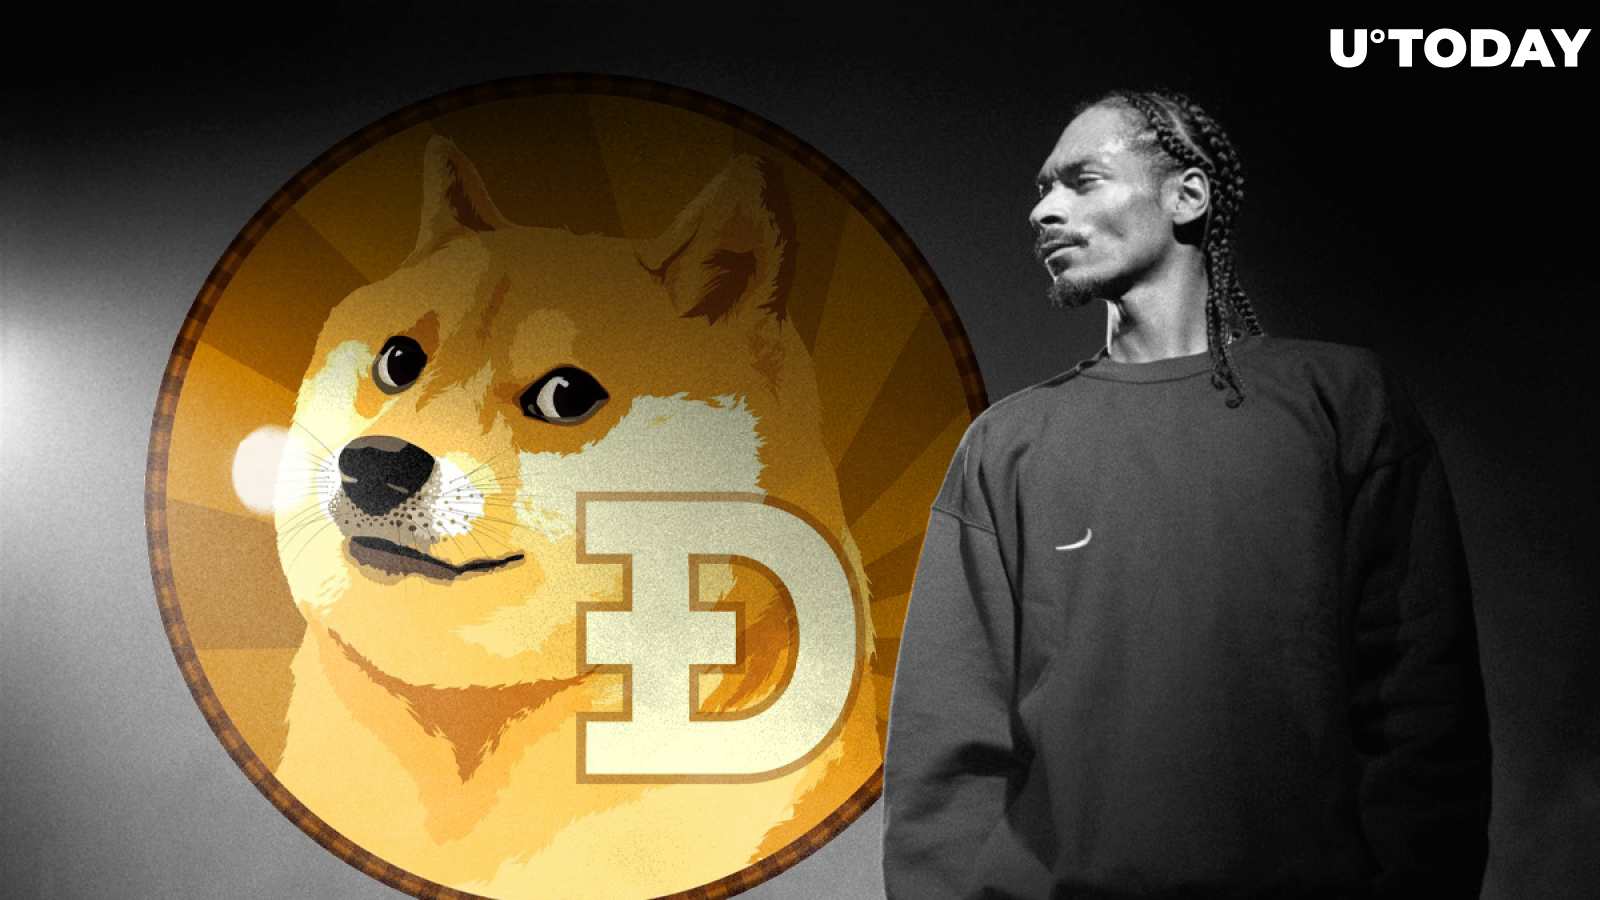 Snoop Dogg Joins Elon Musk in Shilling Dogecoin